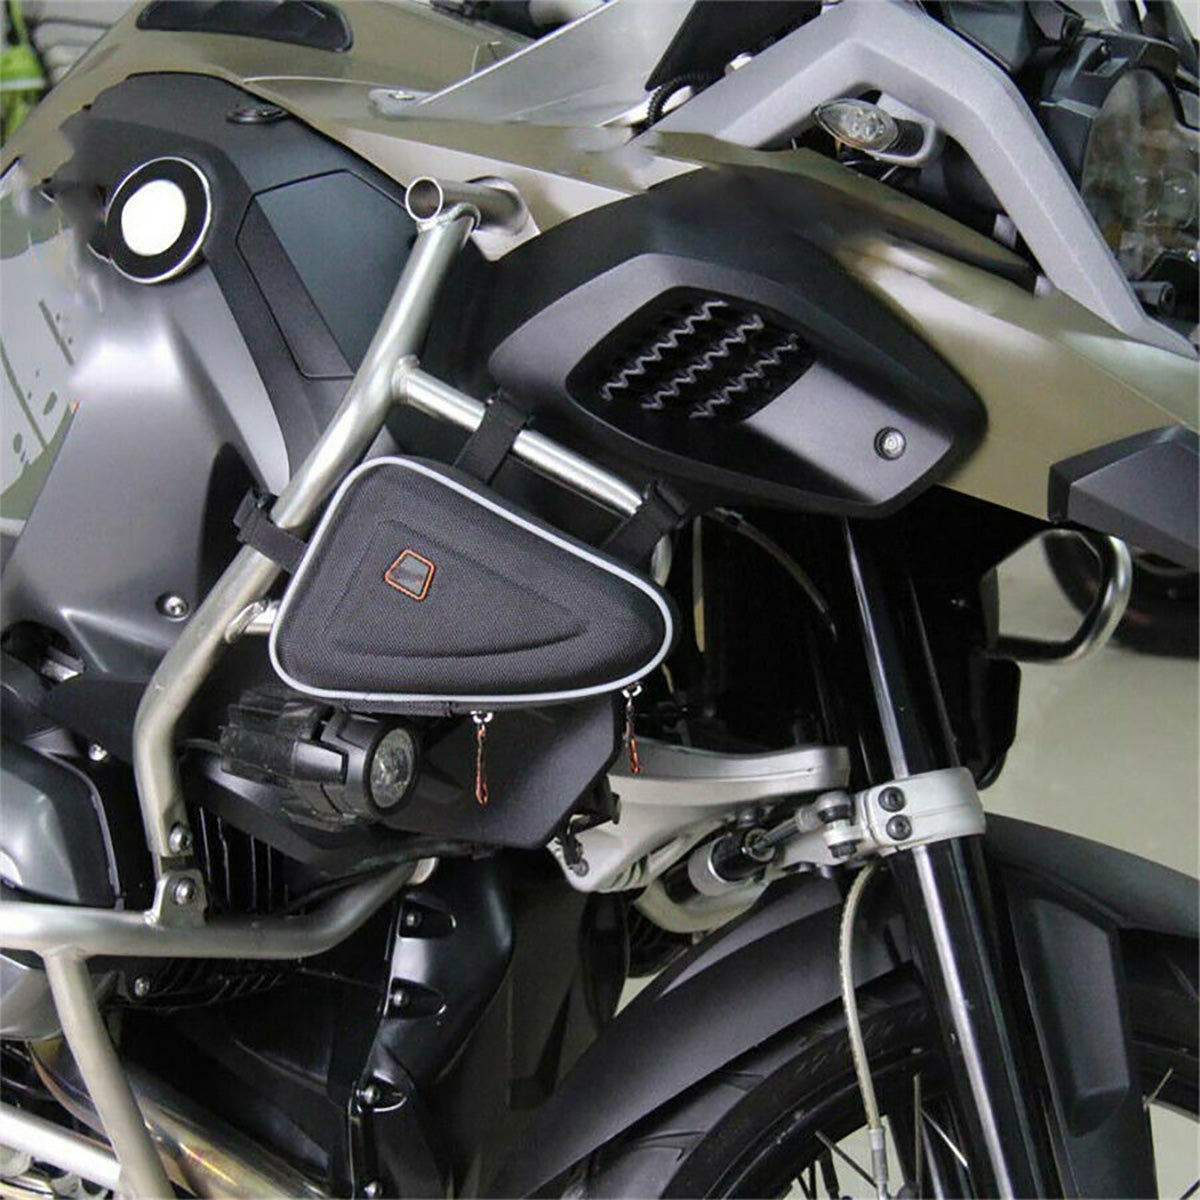 Black Motorcycle Frame Storage Bag Saddlebags For BMW G310GS R1200GS F800GS F650GS F700GS R1250GS